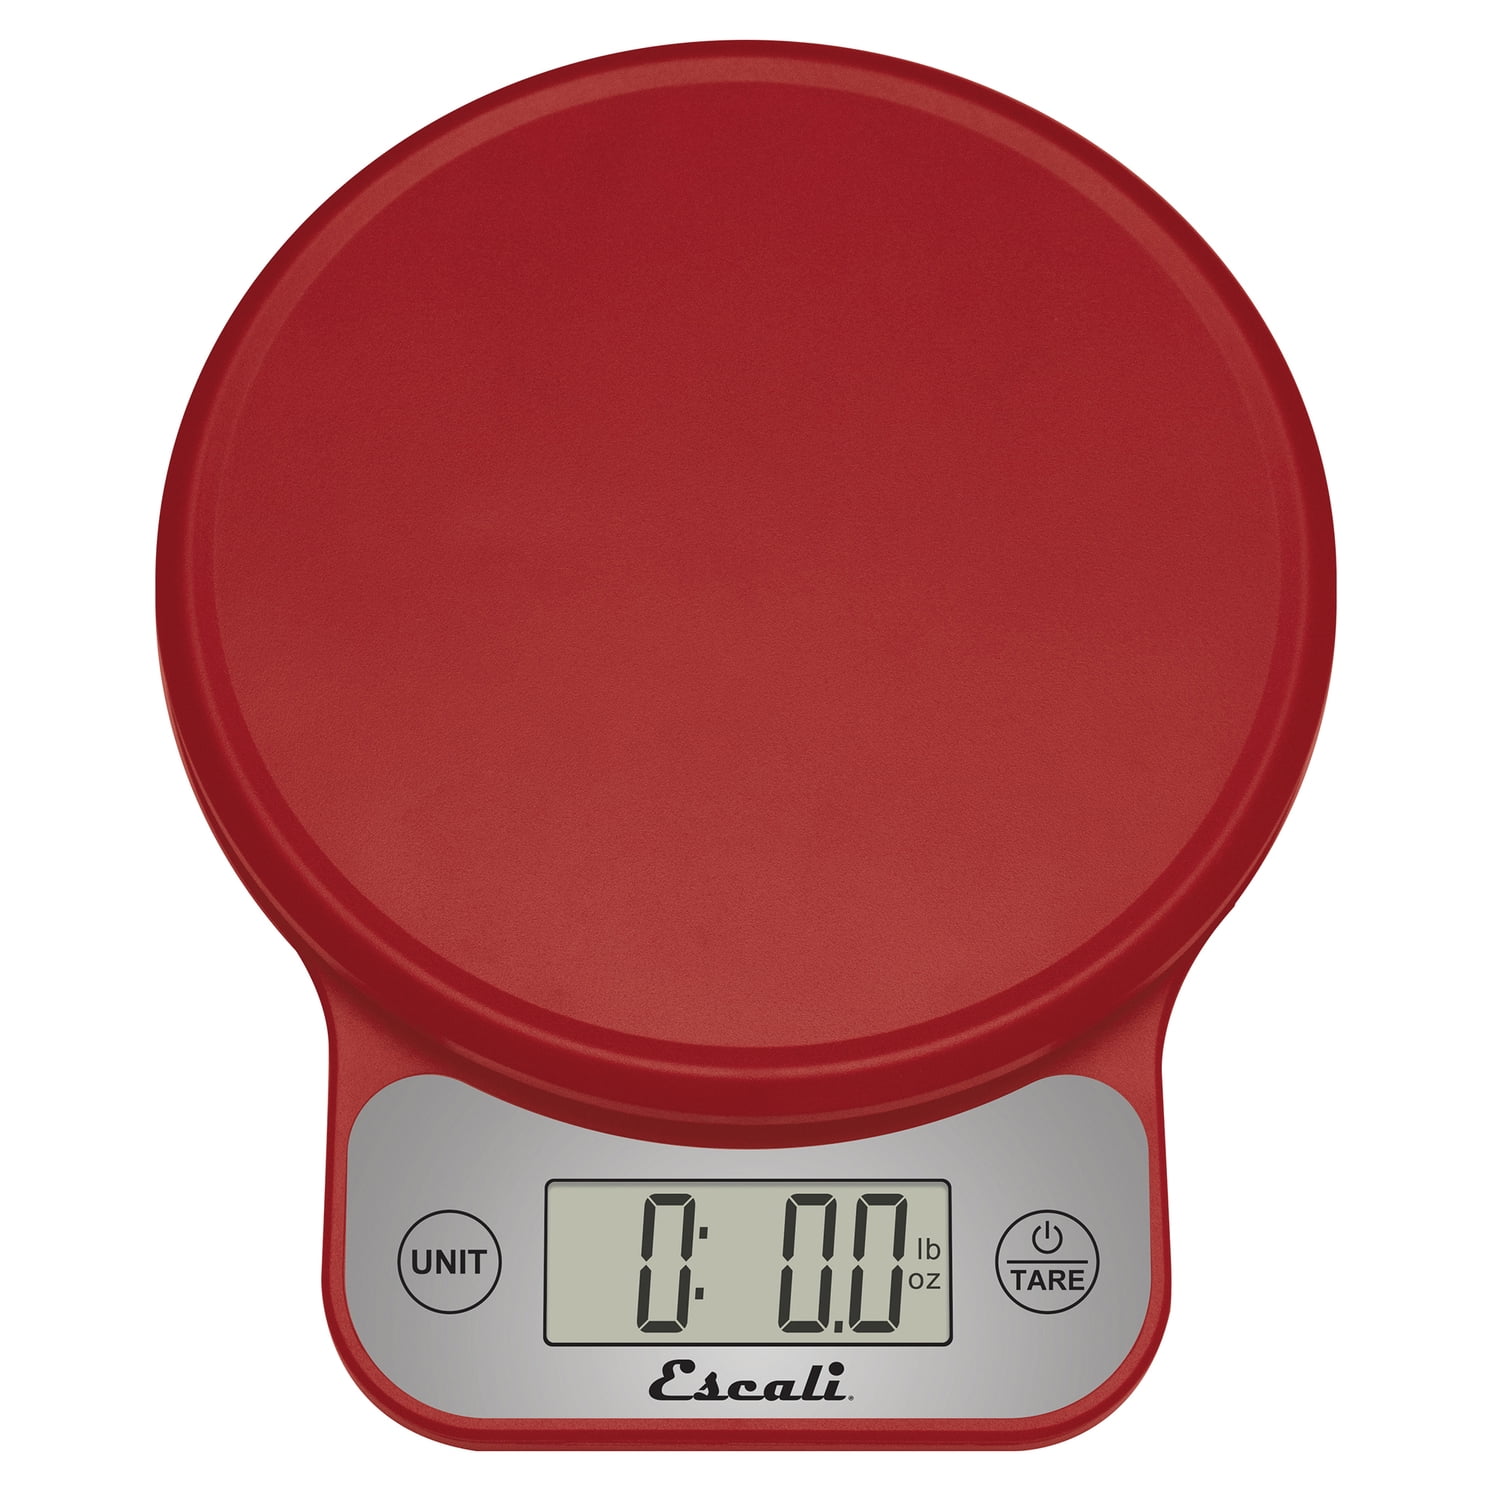 Escali Pana V136 Large Volume Measuring Kitchen/Baking/Cooking Scale,  Preprogrammed with Over 500 Ingredients, LCD Digital Display, 13lb  Capacity, Universal, Stainless 